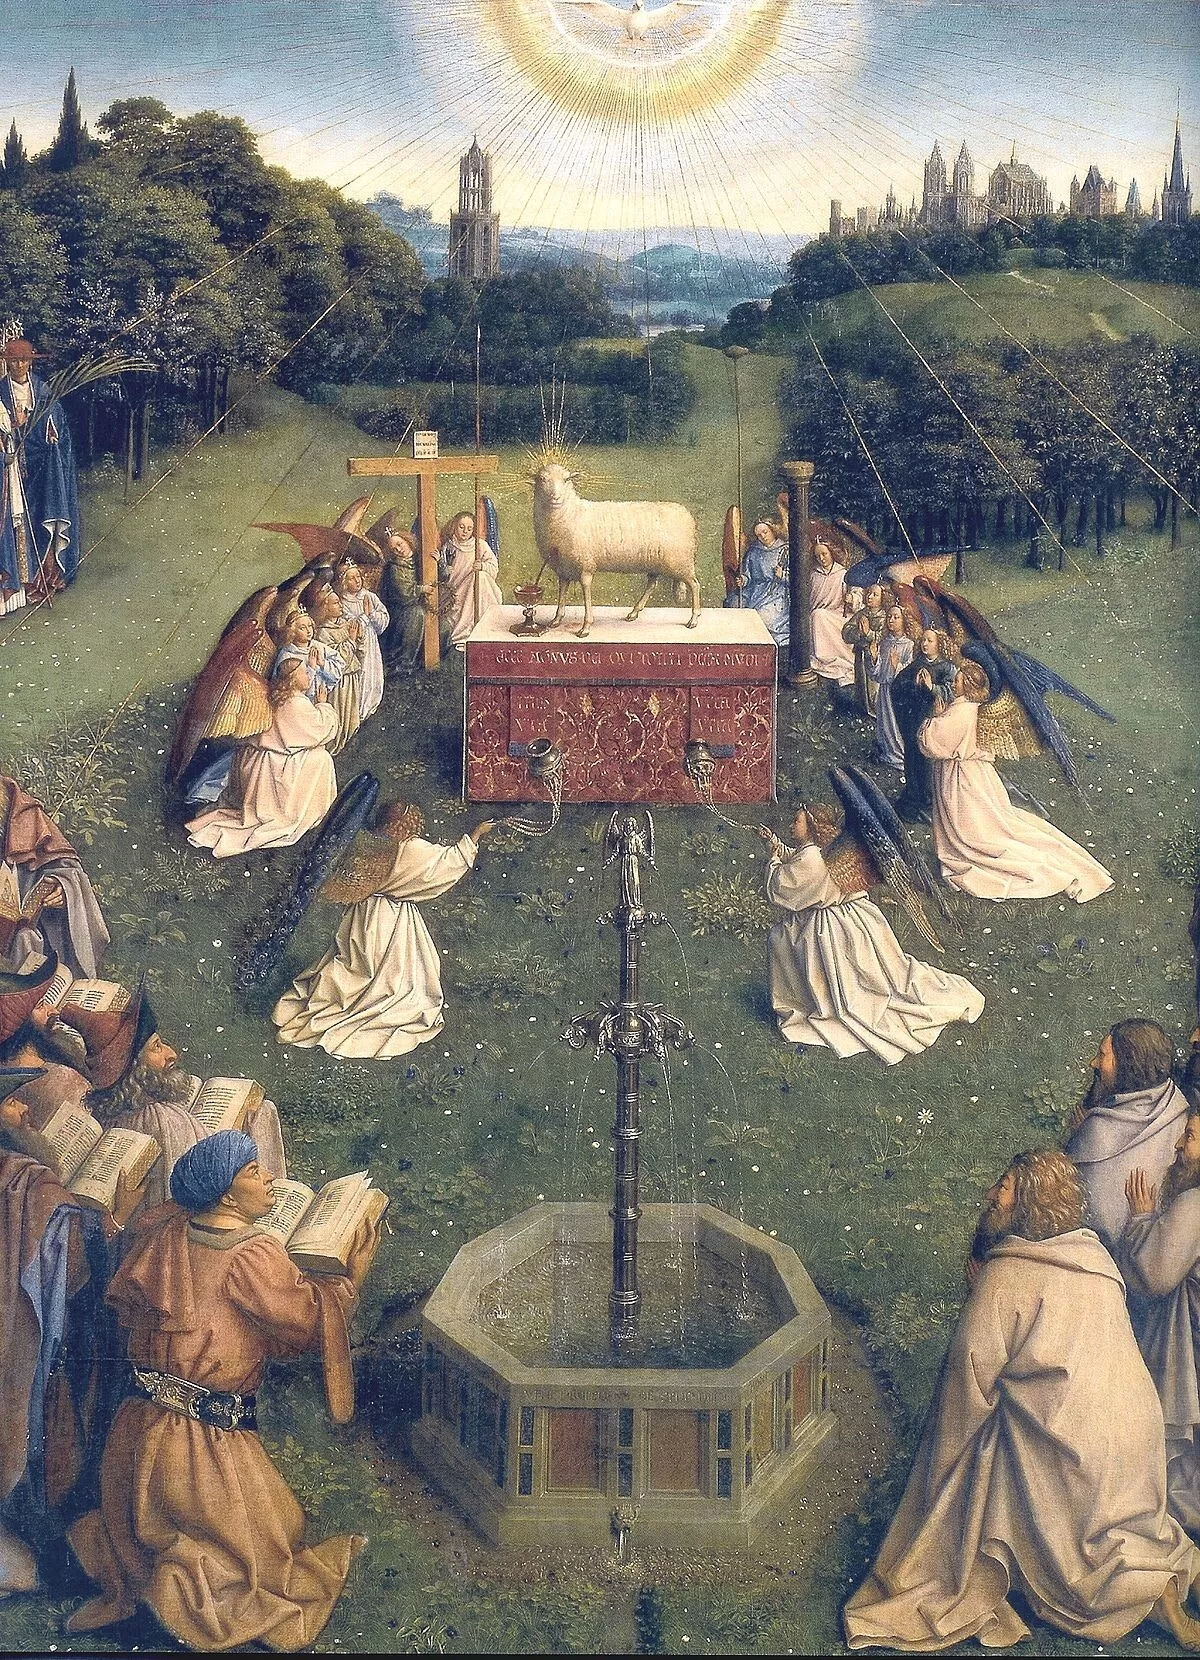 The Eucharist, Grounds for HOPE